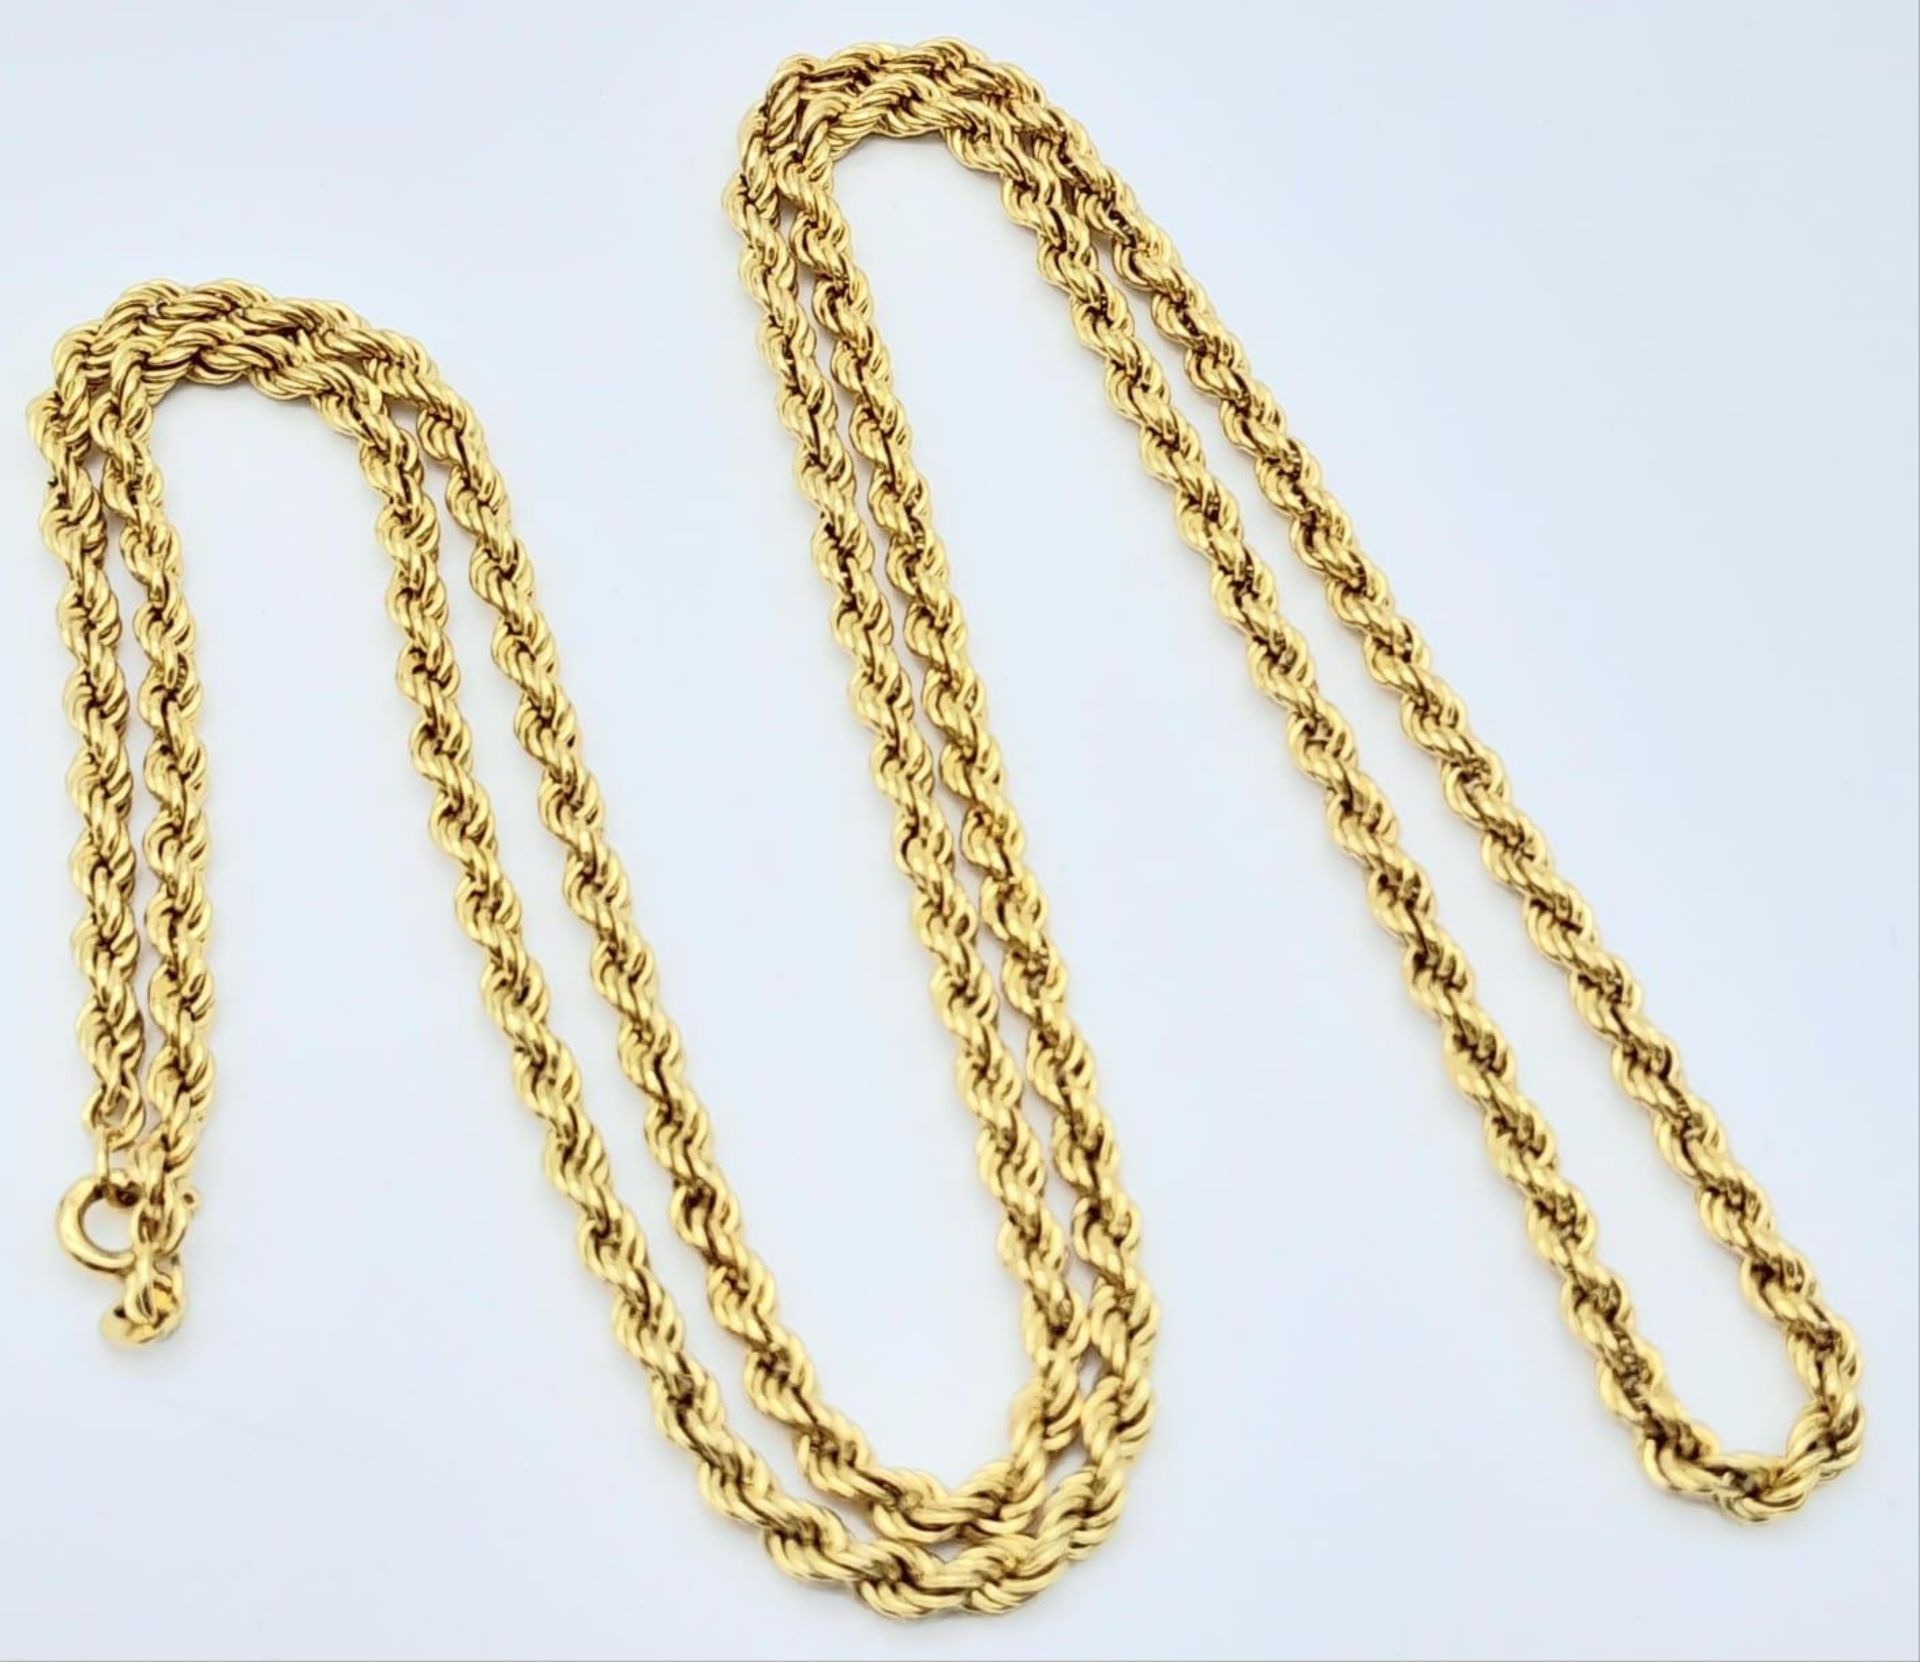 A 9K Yellow Gold Rope Necklace. 60cm length. 6.05g weight.